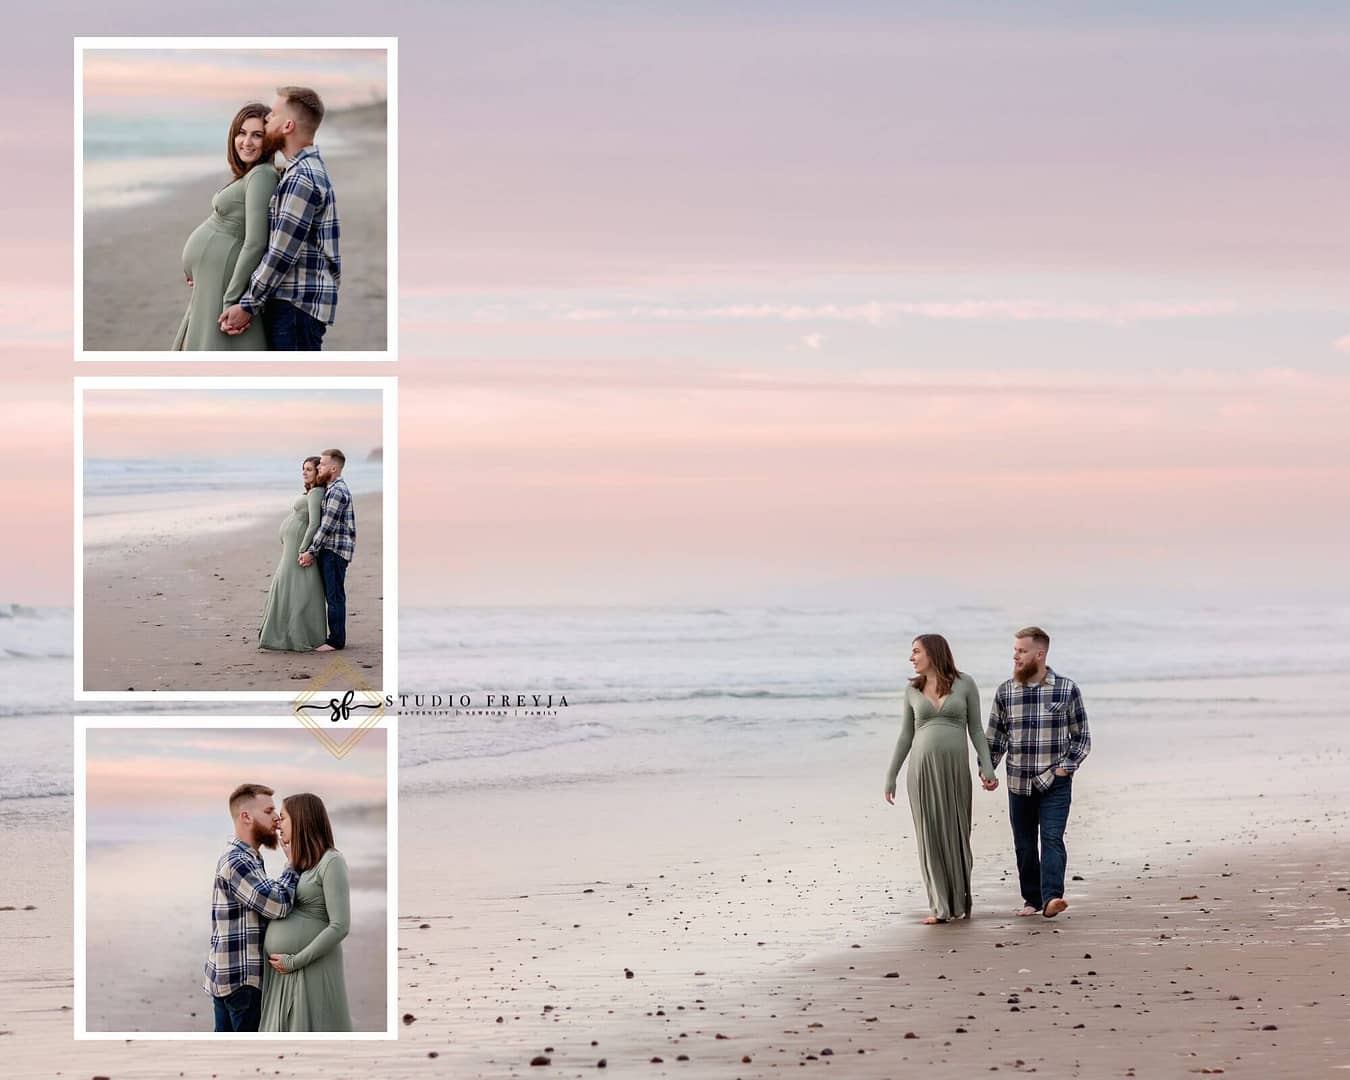 Cotton Candy Skies at Torrey Pines Maternity Pictures with couple walking on the beach.